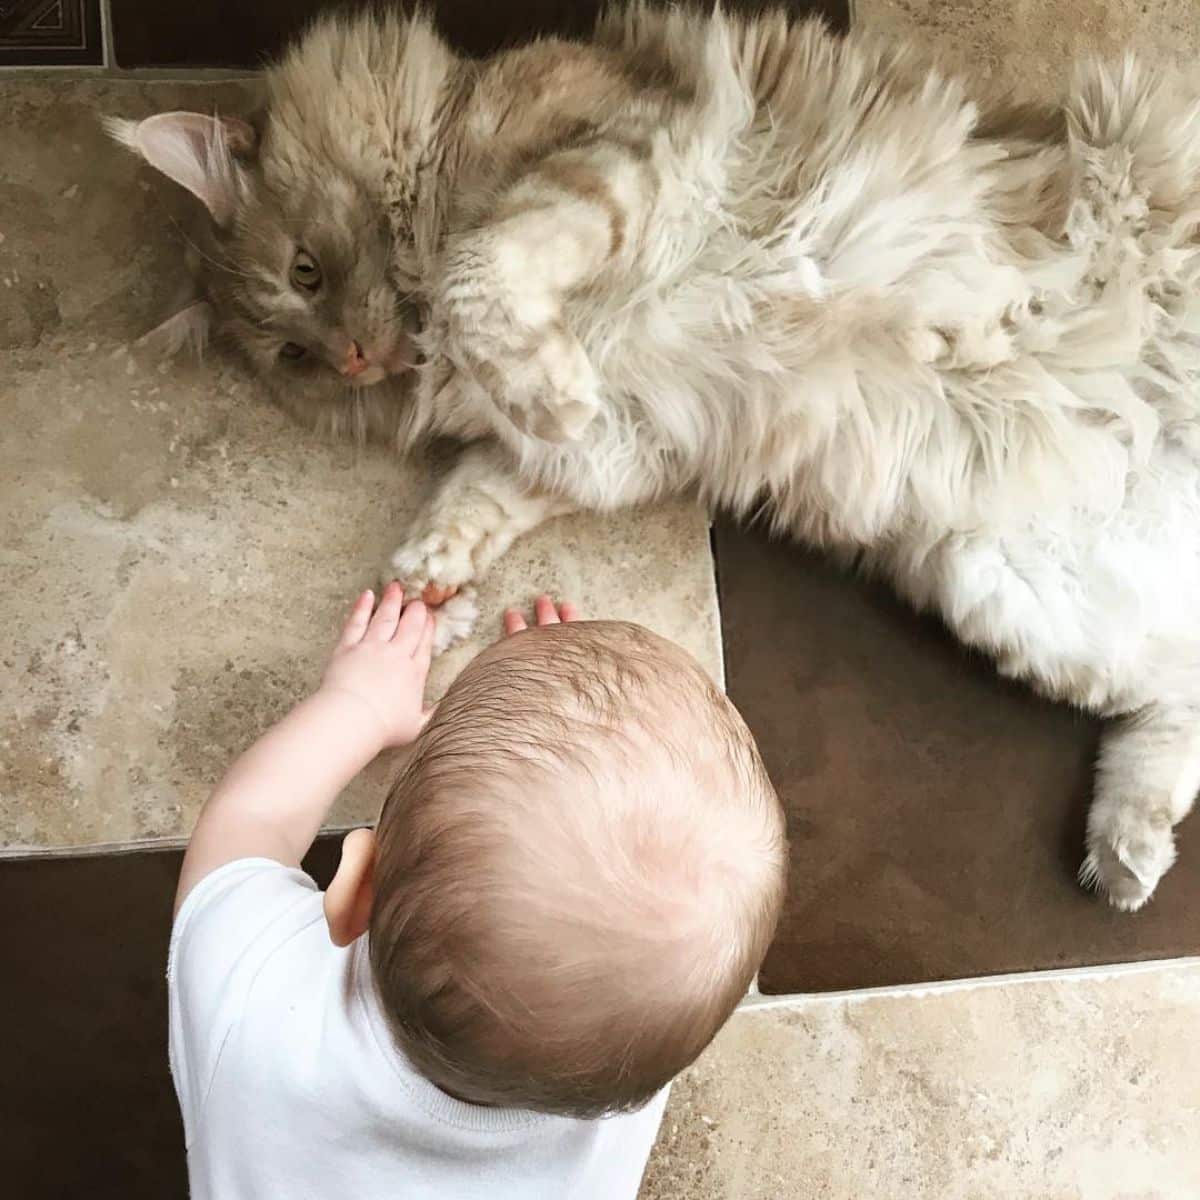 A baby playing with a fluffy gray maine coon on a floor.